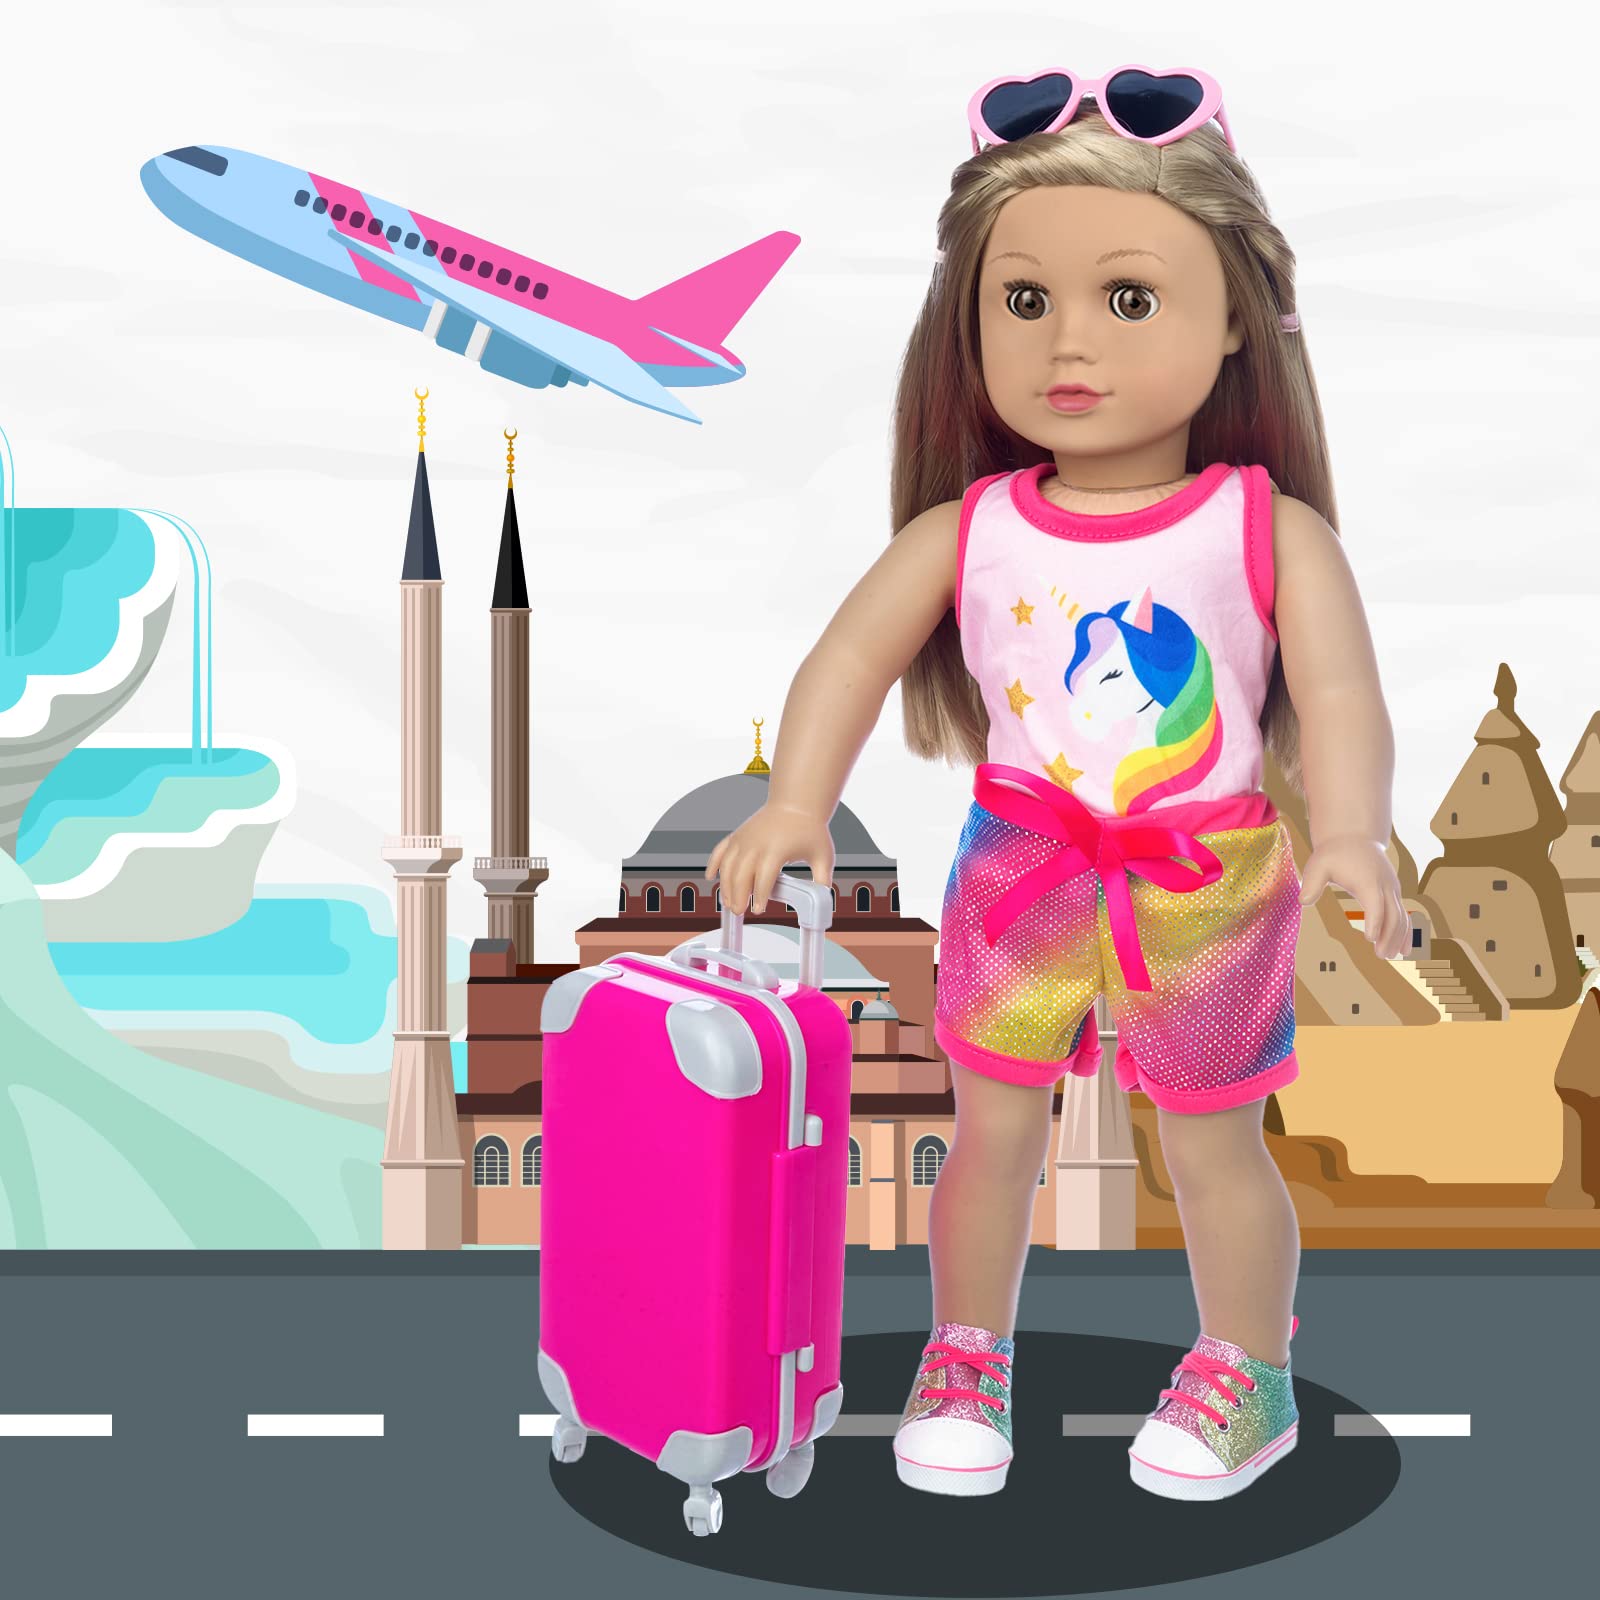 XFEYUE 23 Pcs 18 inch Doll Clothes and Accessories - Suitcase Luggage , Pillow, Sunglasses, Camera, Passport, Mobile Phone , Computer Doll Travel Gear Play Set Fit 18 inch Girl Doll (No Doll)